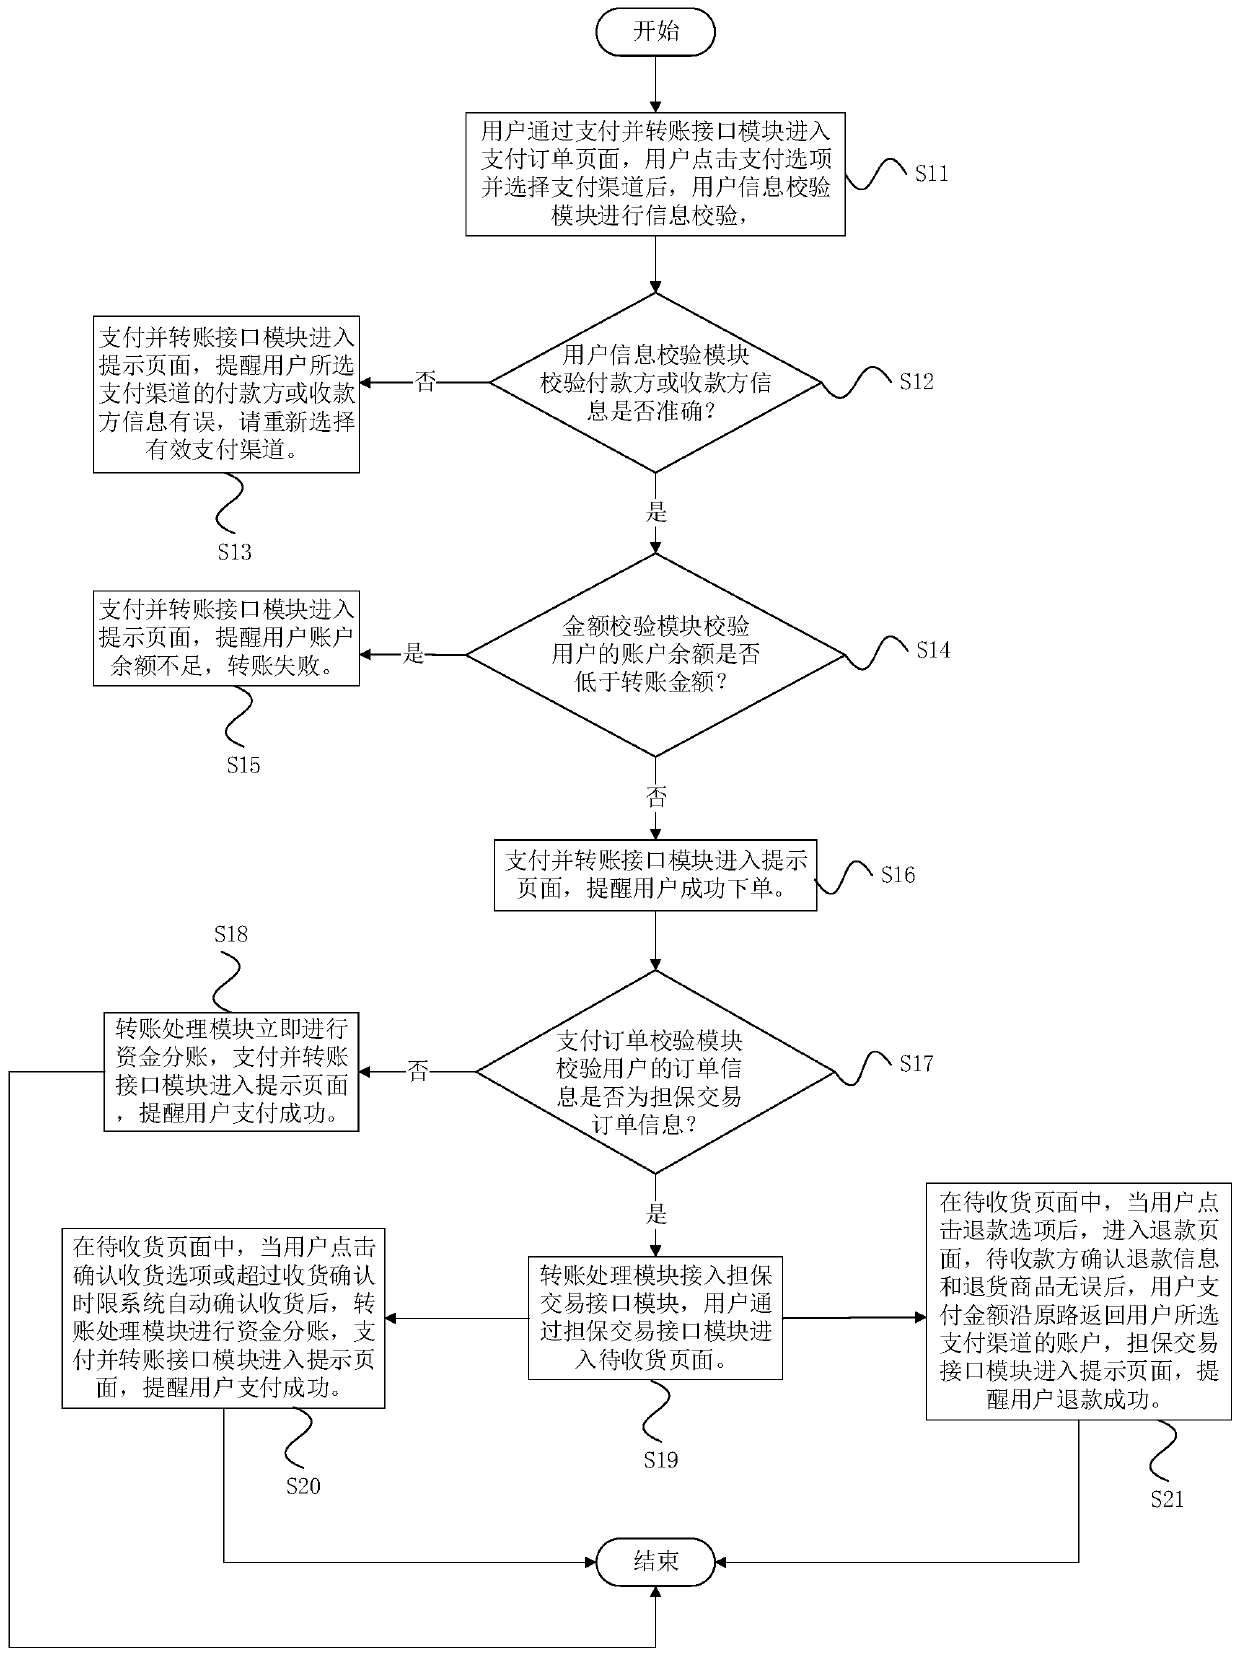 Transfer system and a transfer method for bank sub-account management